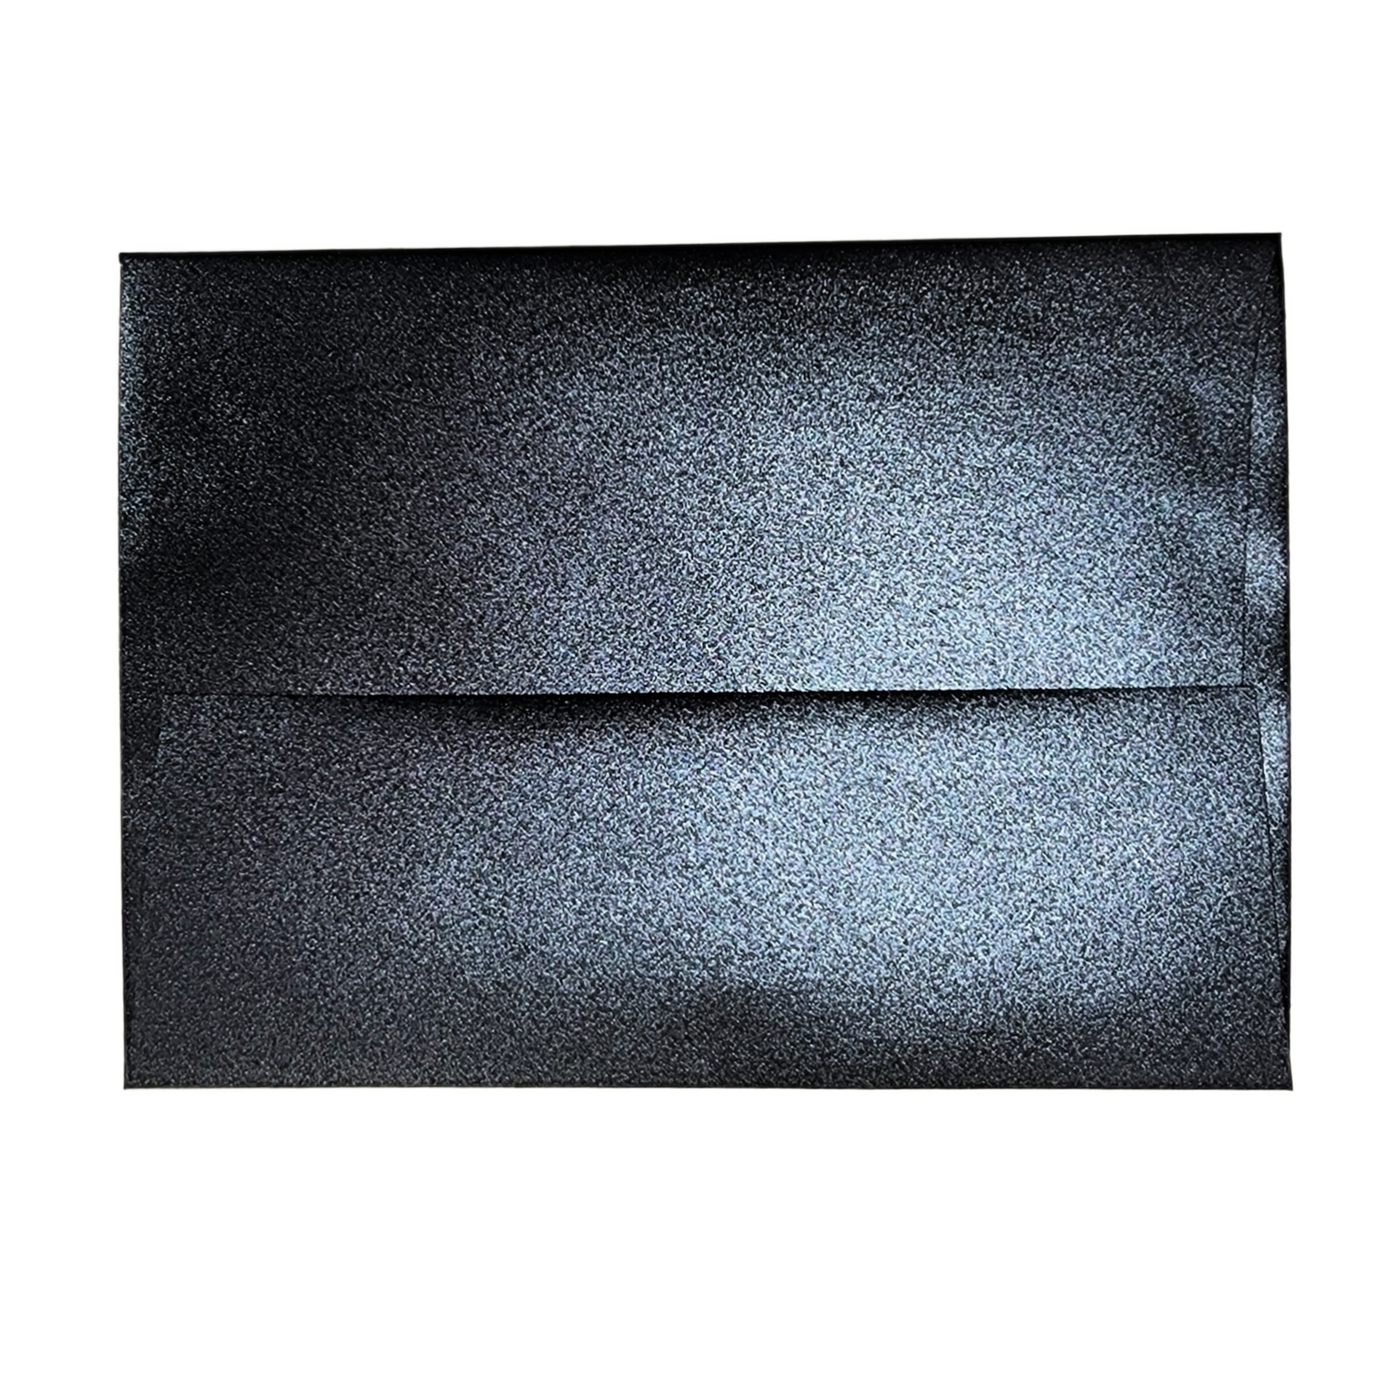 Charcoal black metallic envelope with pearlescent finish that instantly elevates your handmade cards. Pearlescent black envelopes for graduation invitations and more.